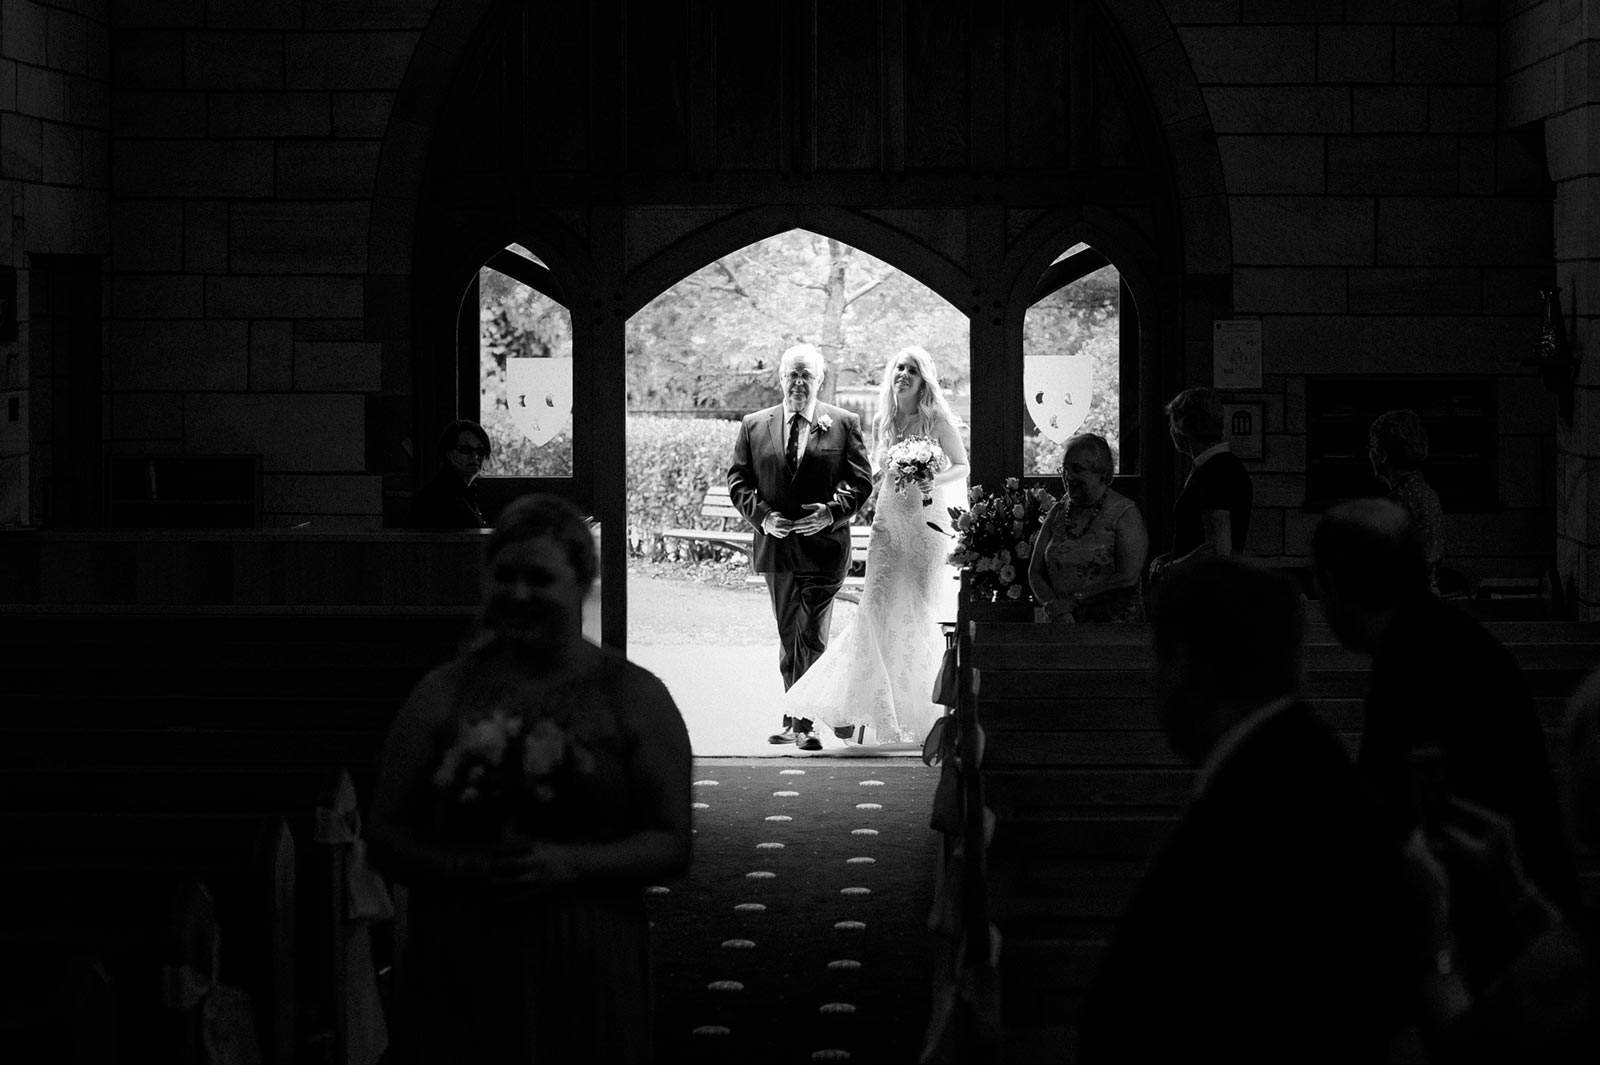 Walking his daughter down the aisle at St Swithuns, Telegraph Rd, Pymble